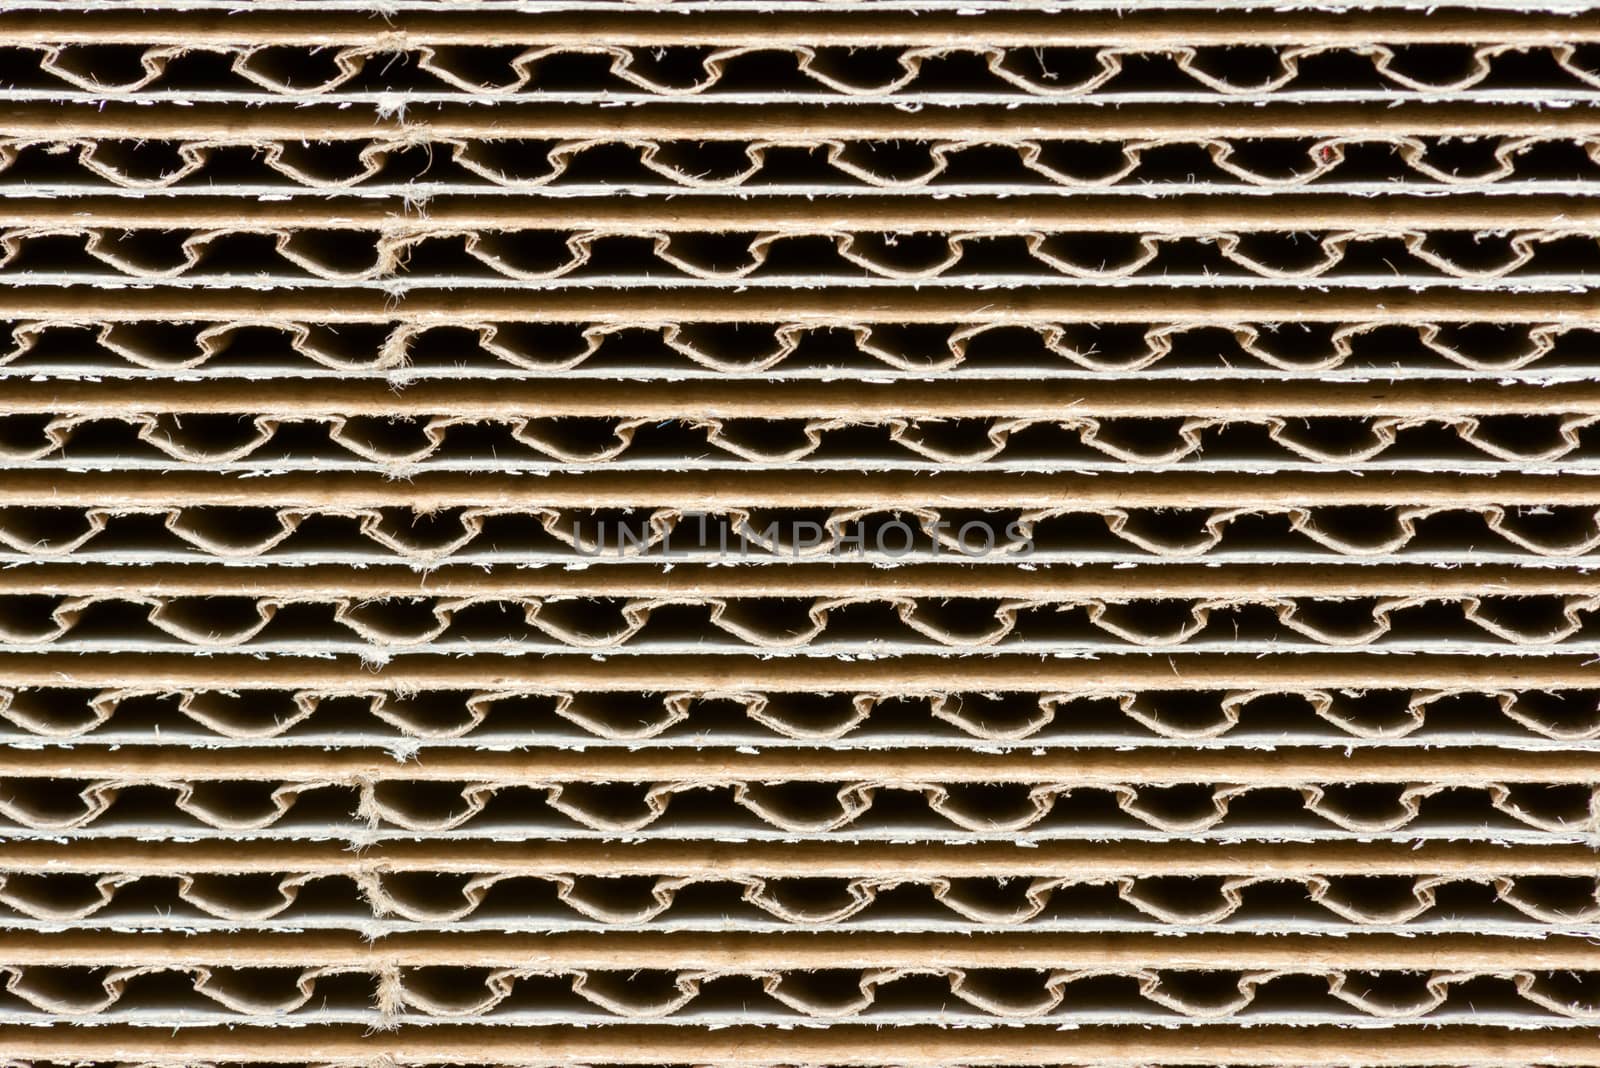 Stack of corrugated cardboard in a large pile